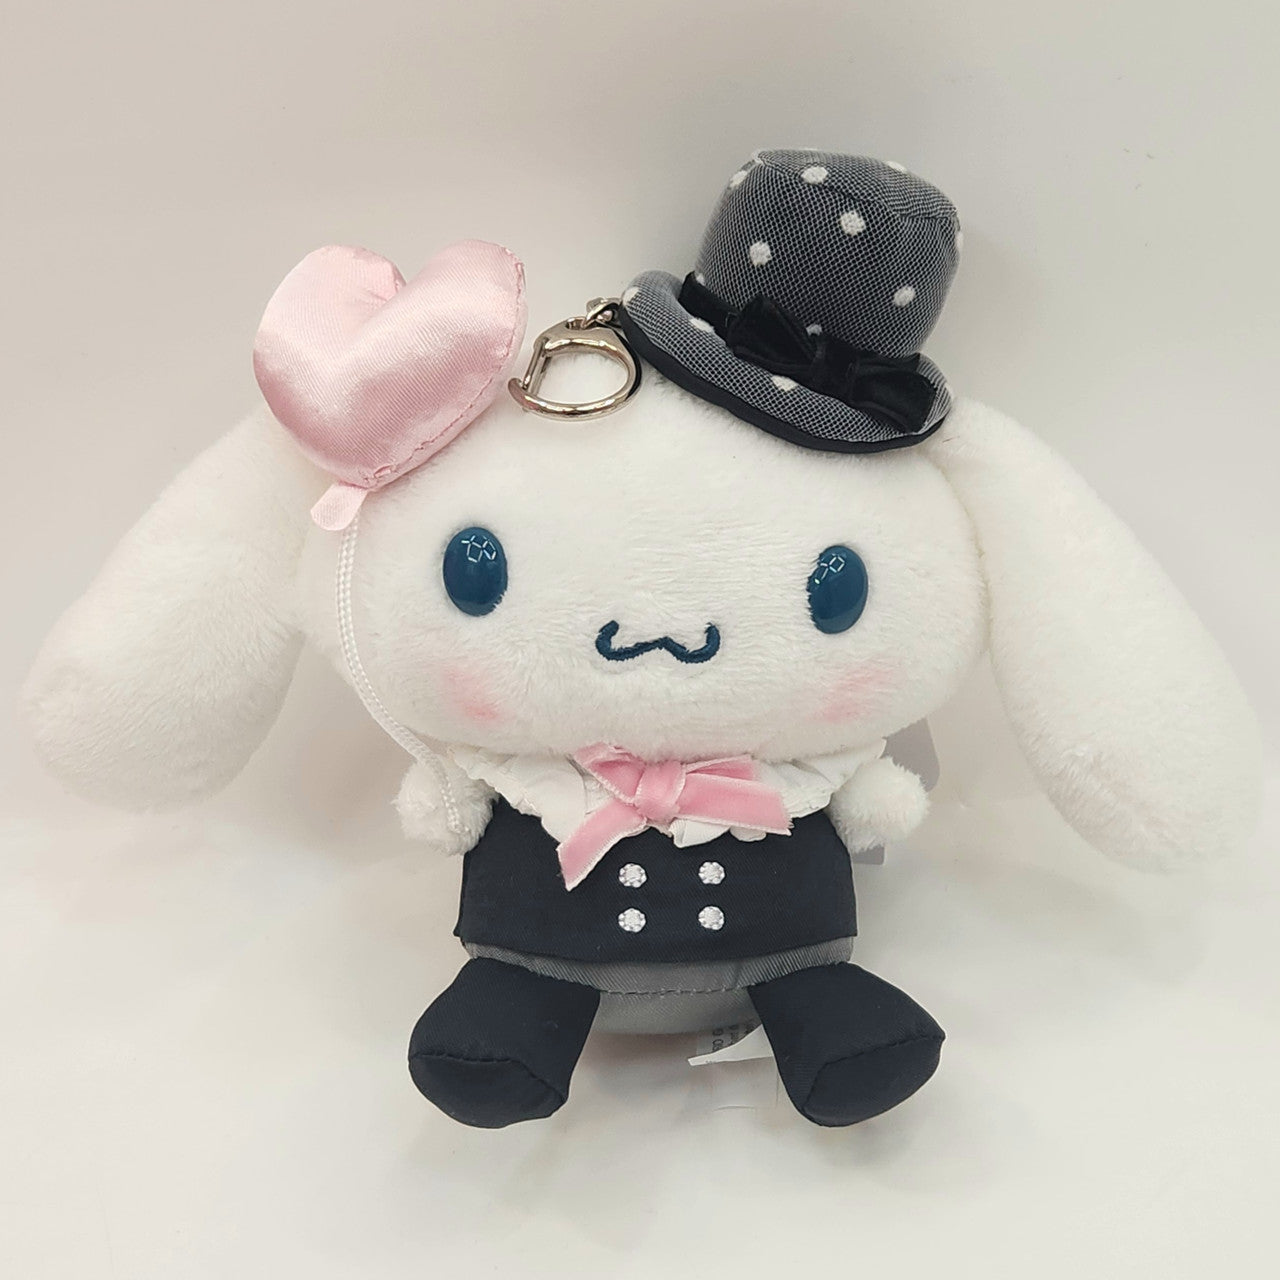 Sanrio SWEET PARTY Keychain with Mascot